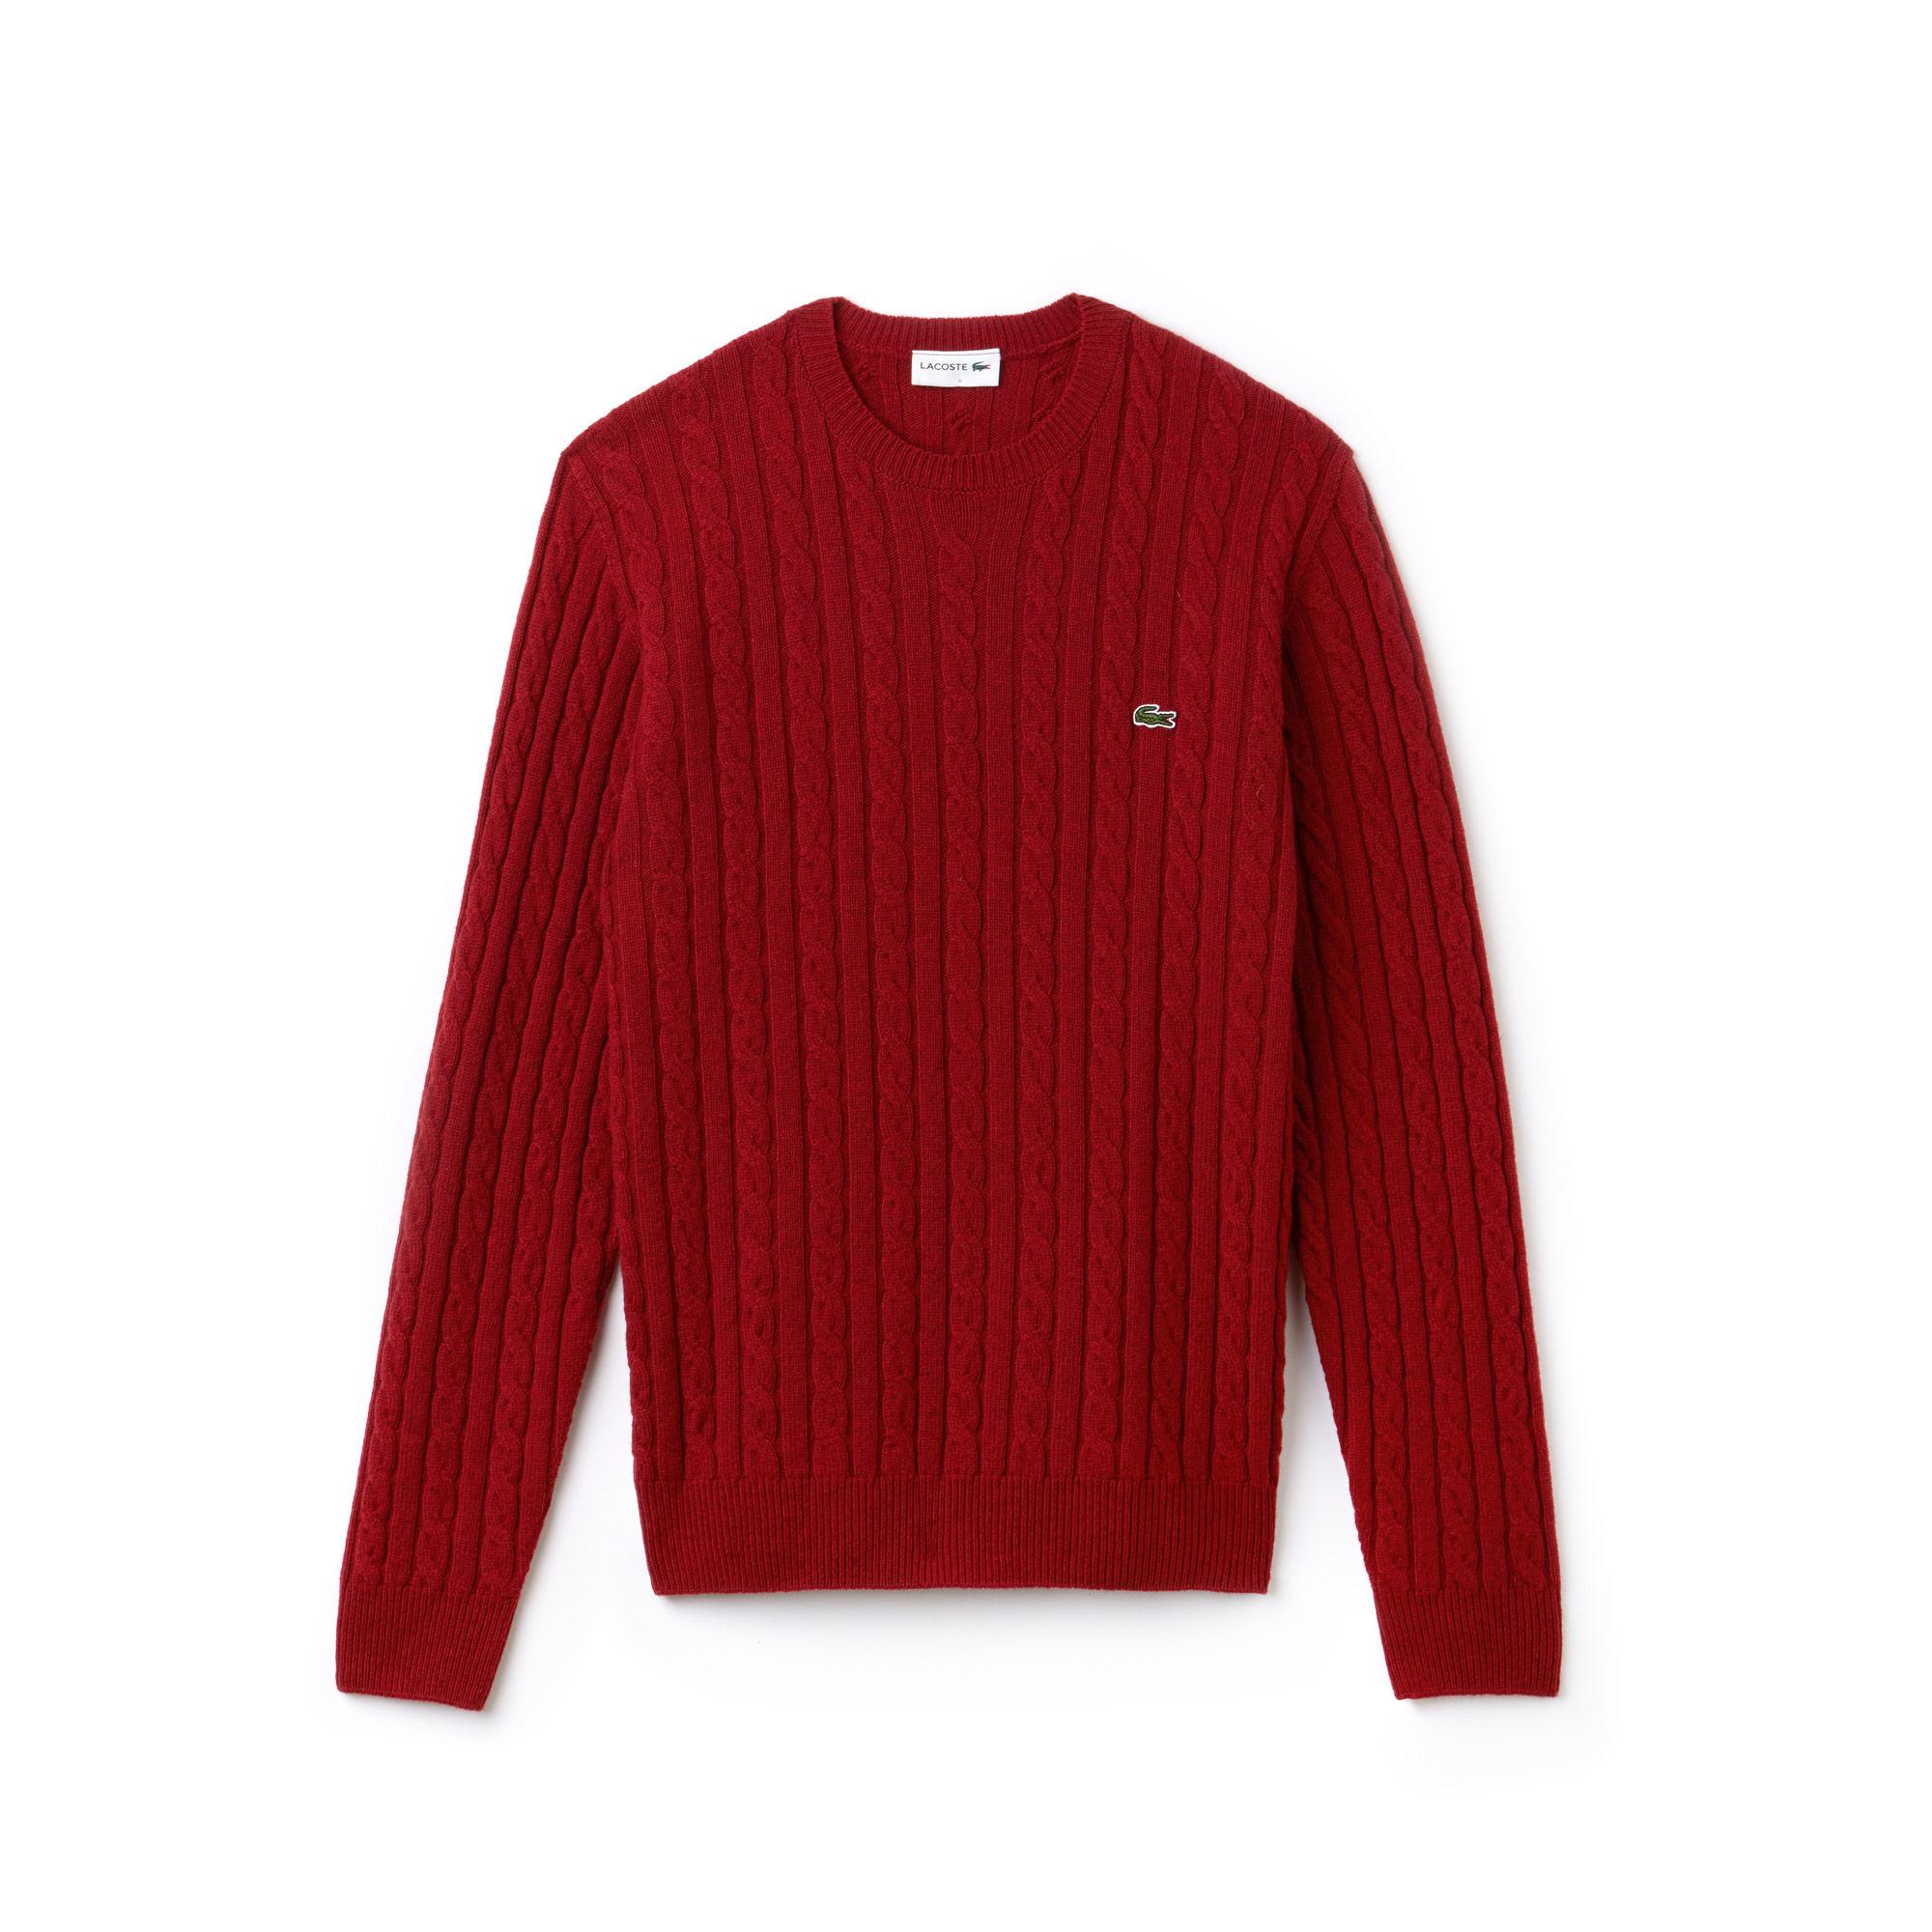 men's crew neck wool cable knit effect sweater